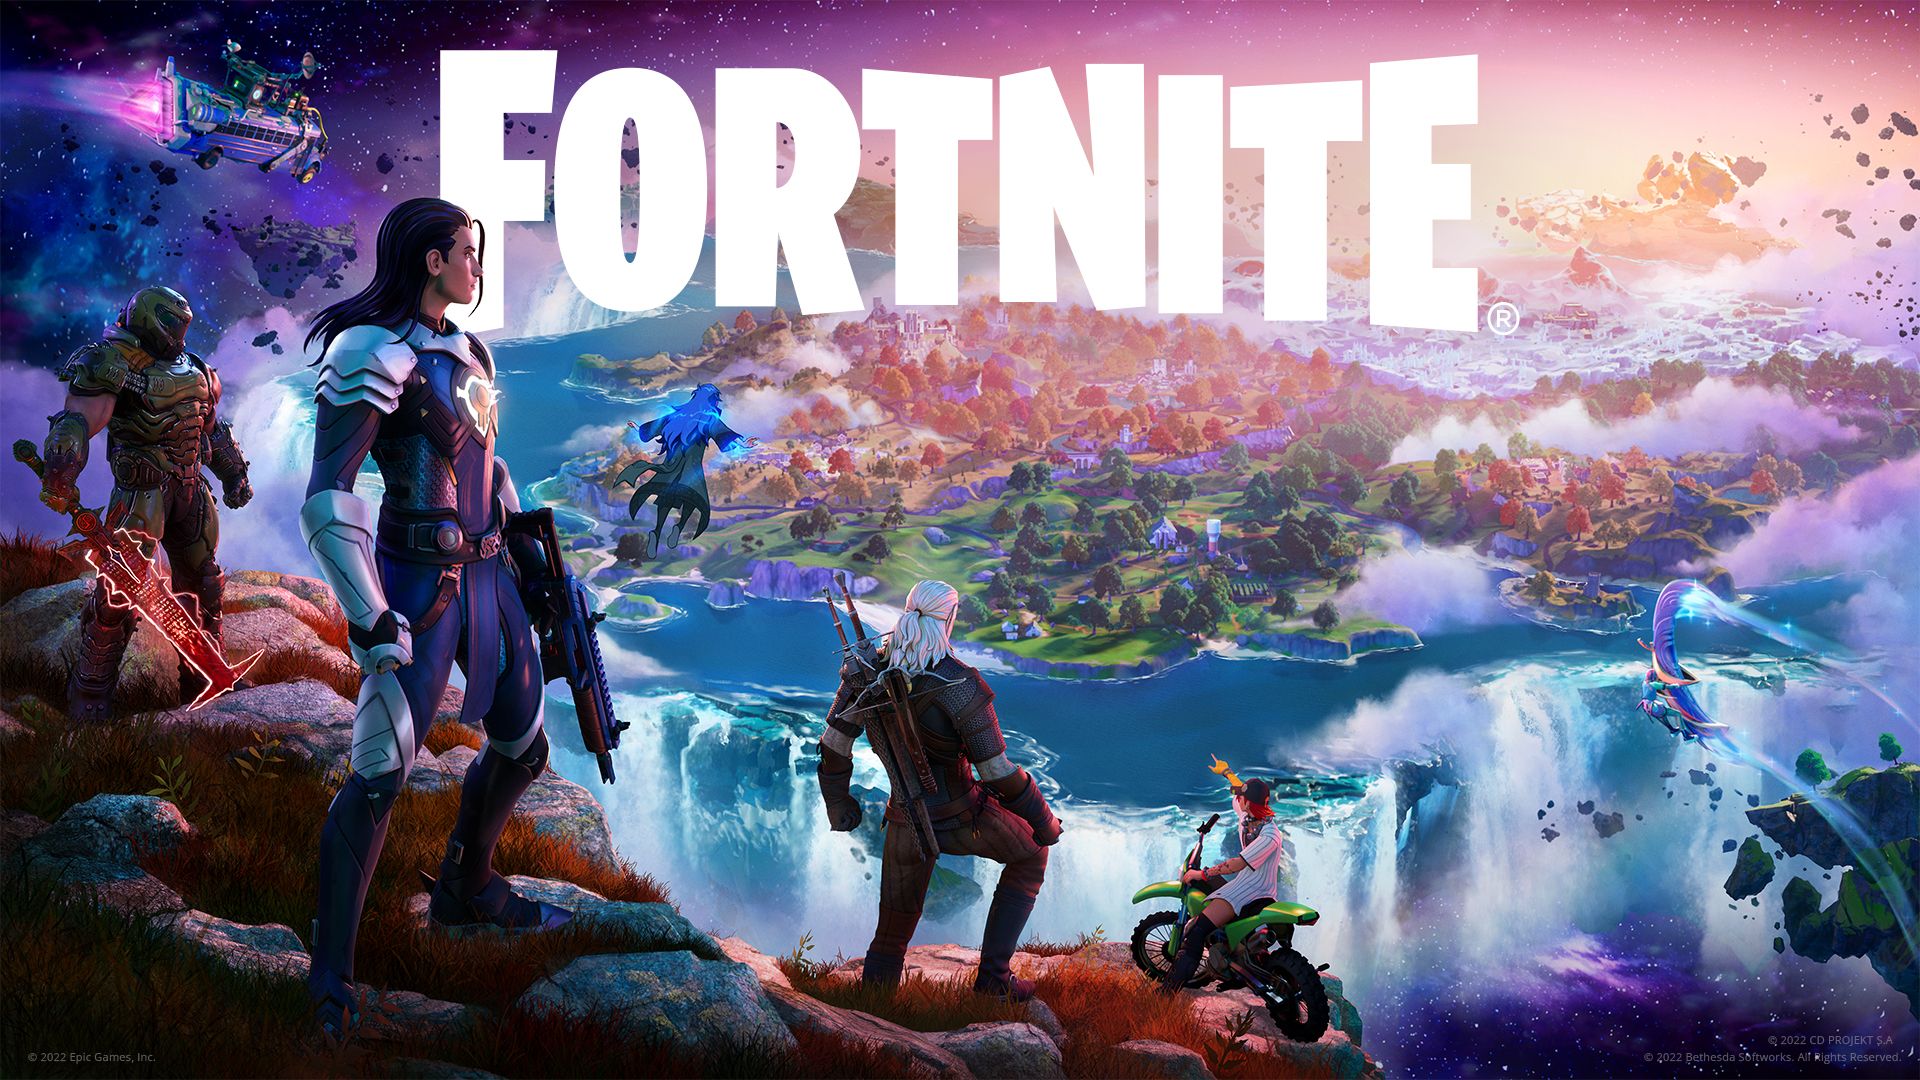 Fortnite characters on a hillside with an island in the background and the Fortnite logo central